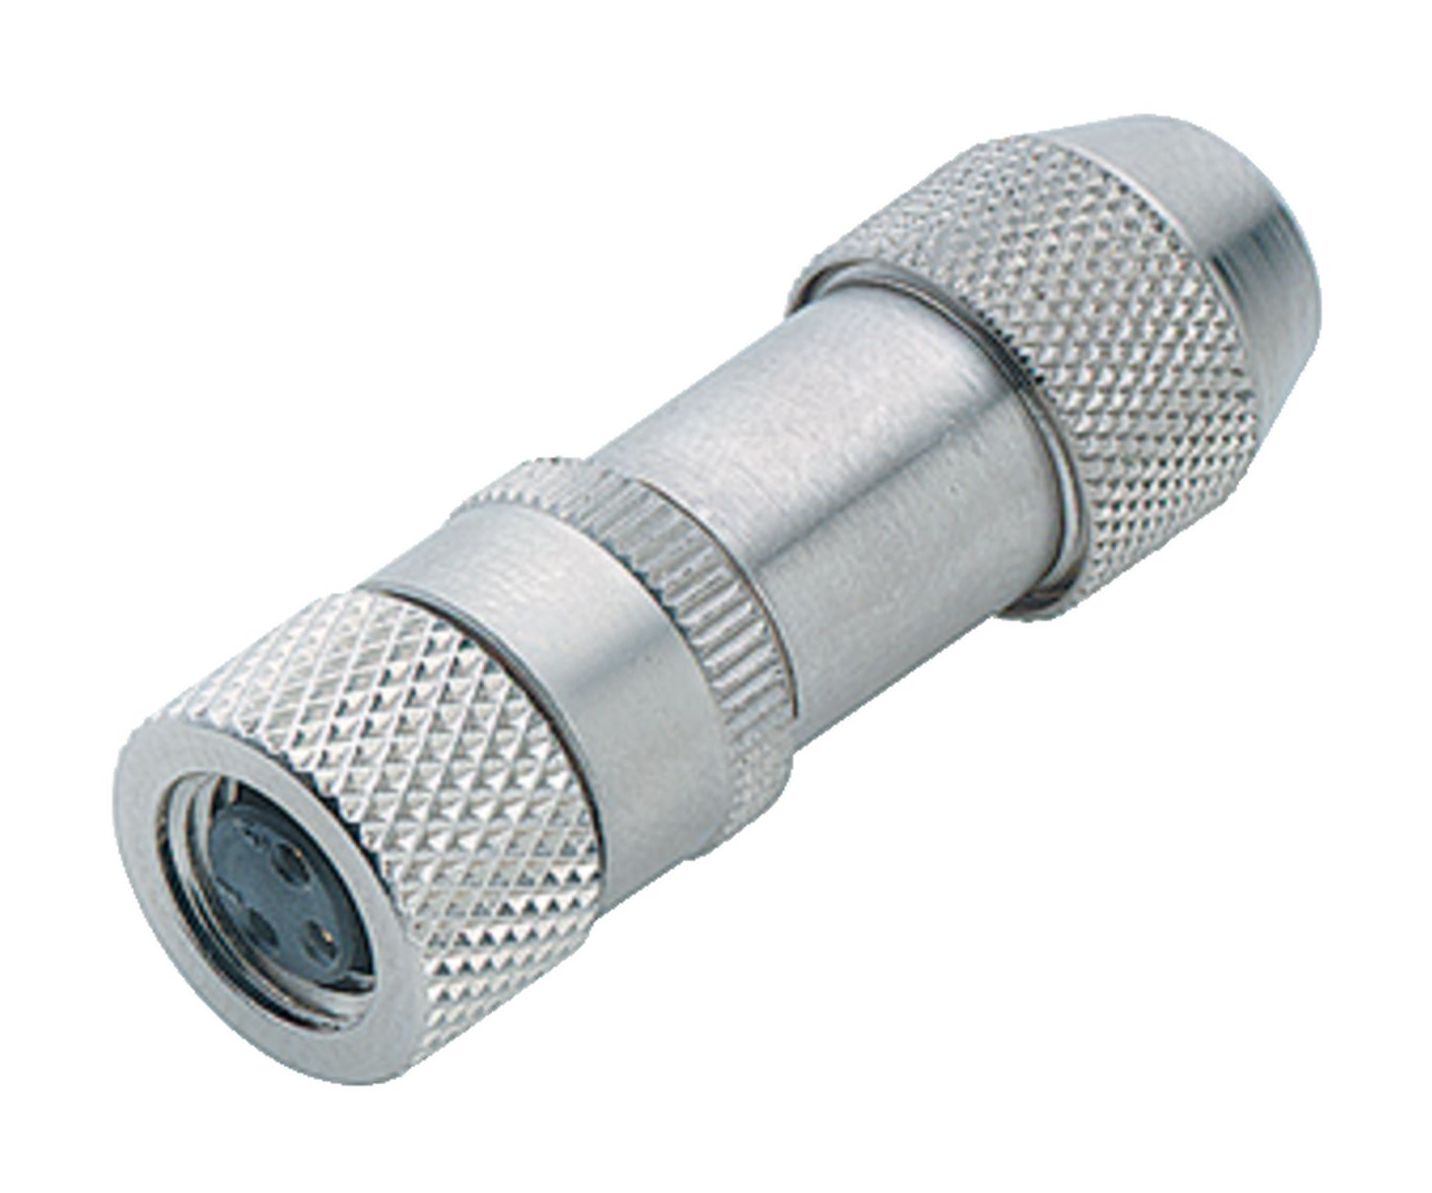 Binder 99-0072-100-02 M9 IP40 Female cable connector, Contacts: 2, 3.0-4.0  mm, unshielded, solder, IP40 - www.